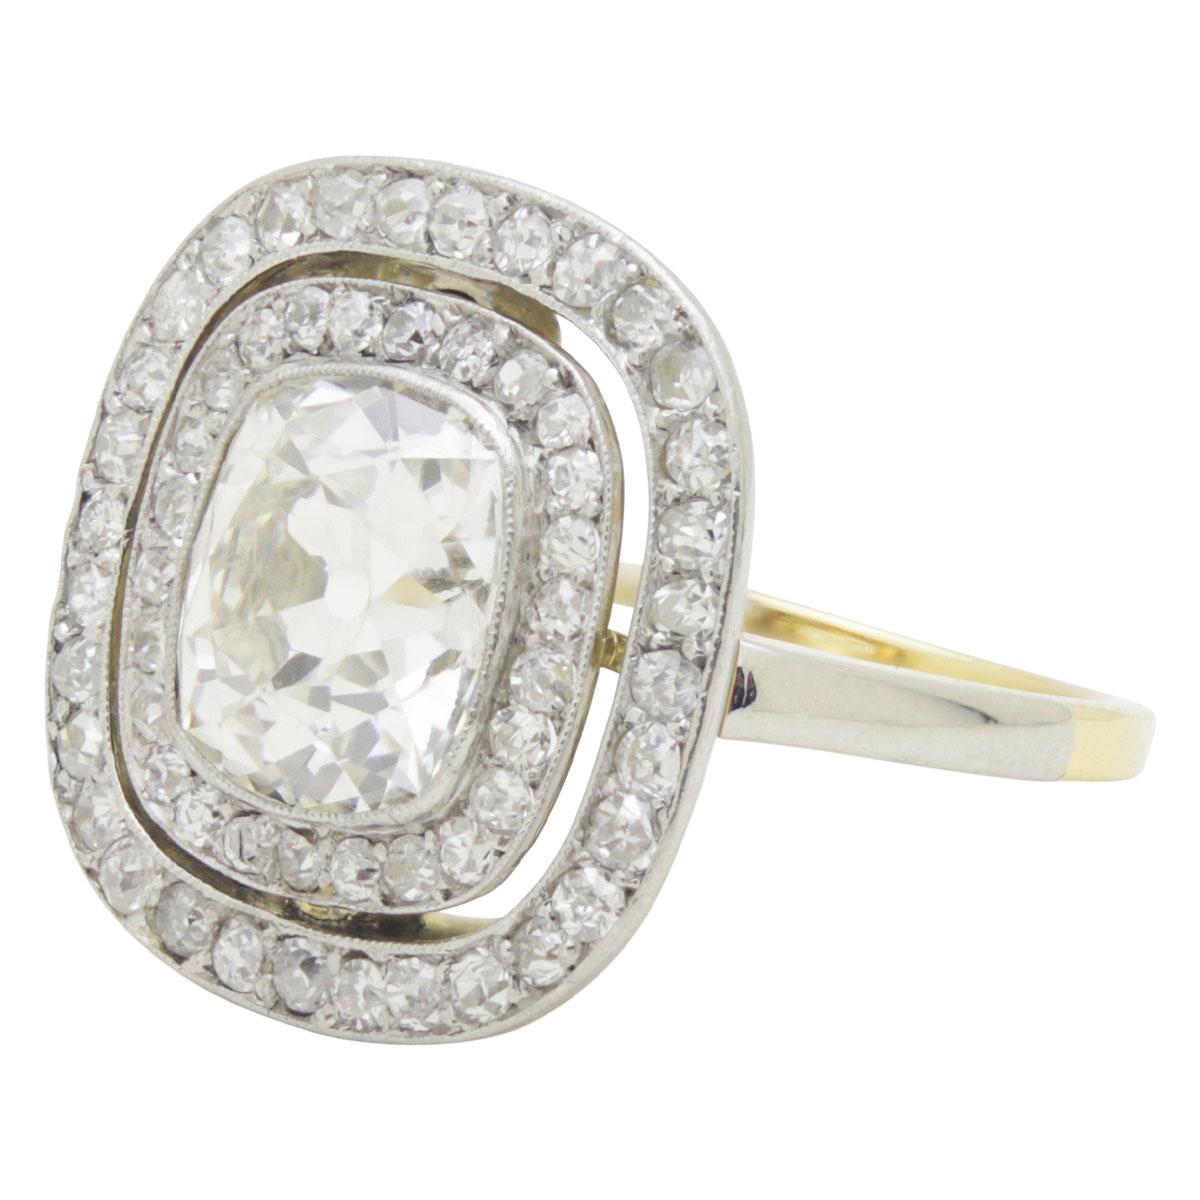 Spectacular is the only way to describe this antique old mine cushion cut diamond ring. Set with a central 2.45ct glittering antique old mine cushion cut diamond this stunning ring will NOT be missed on your hand. It has so much presence, if the